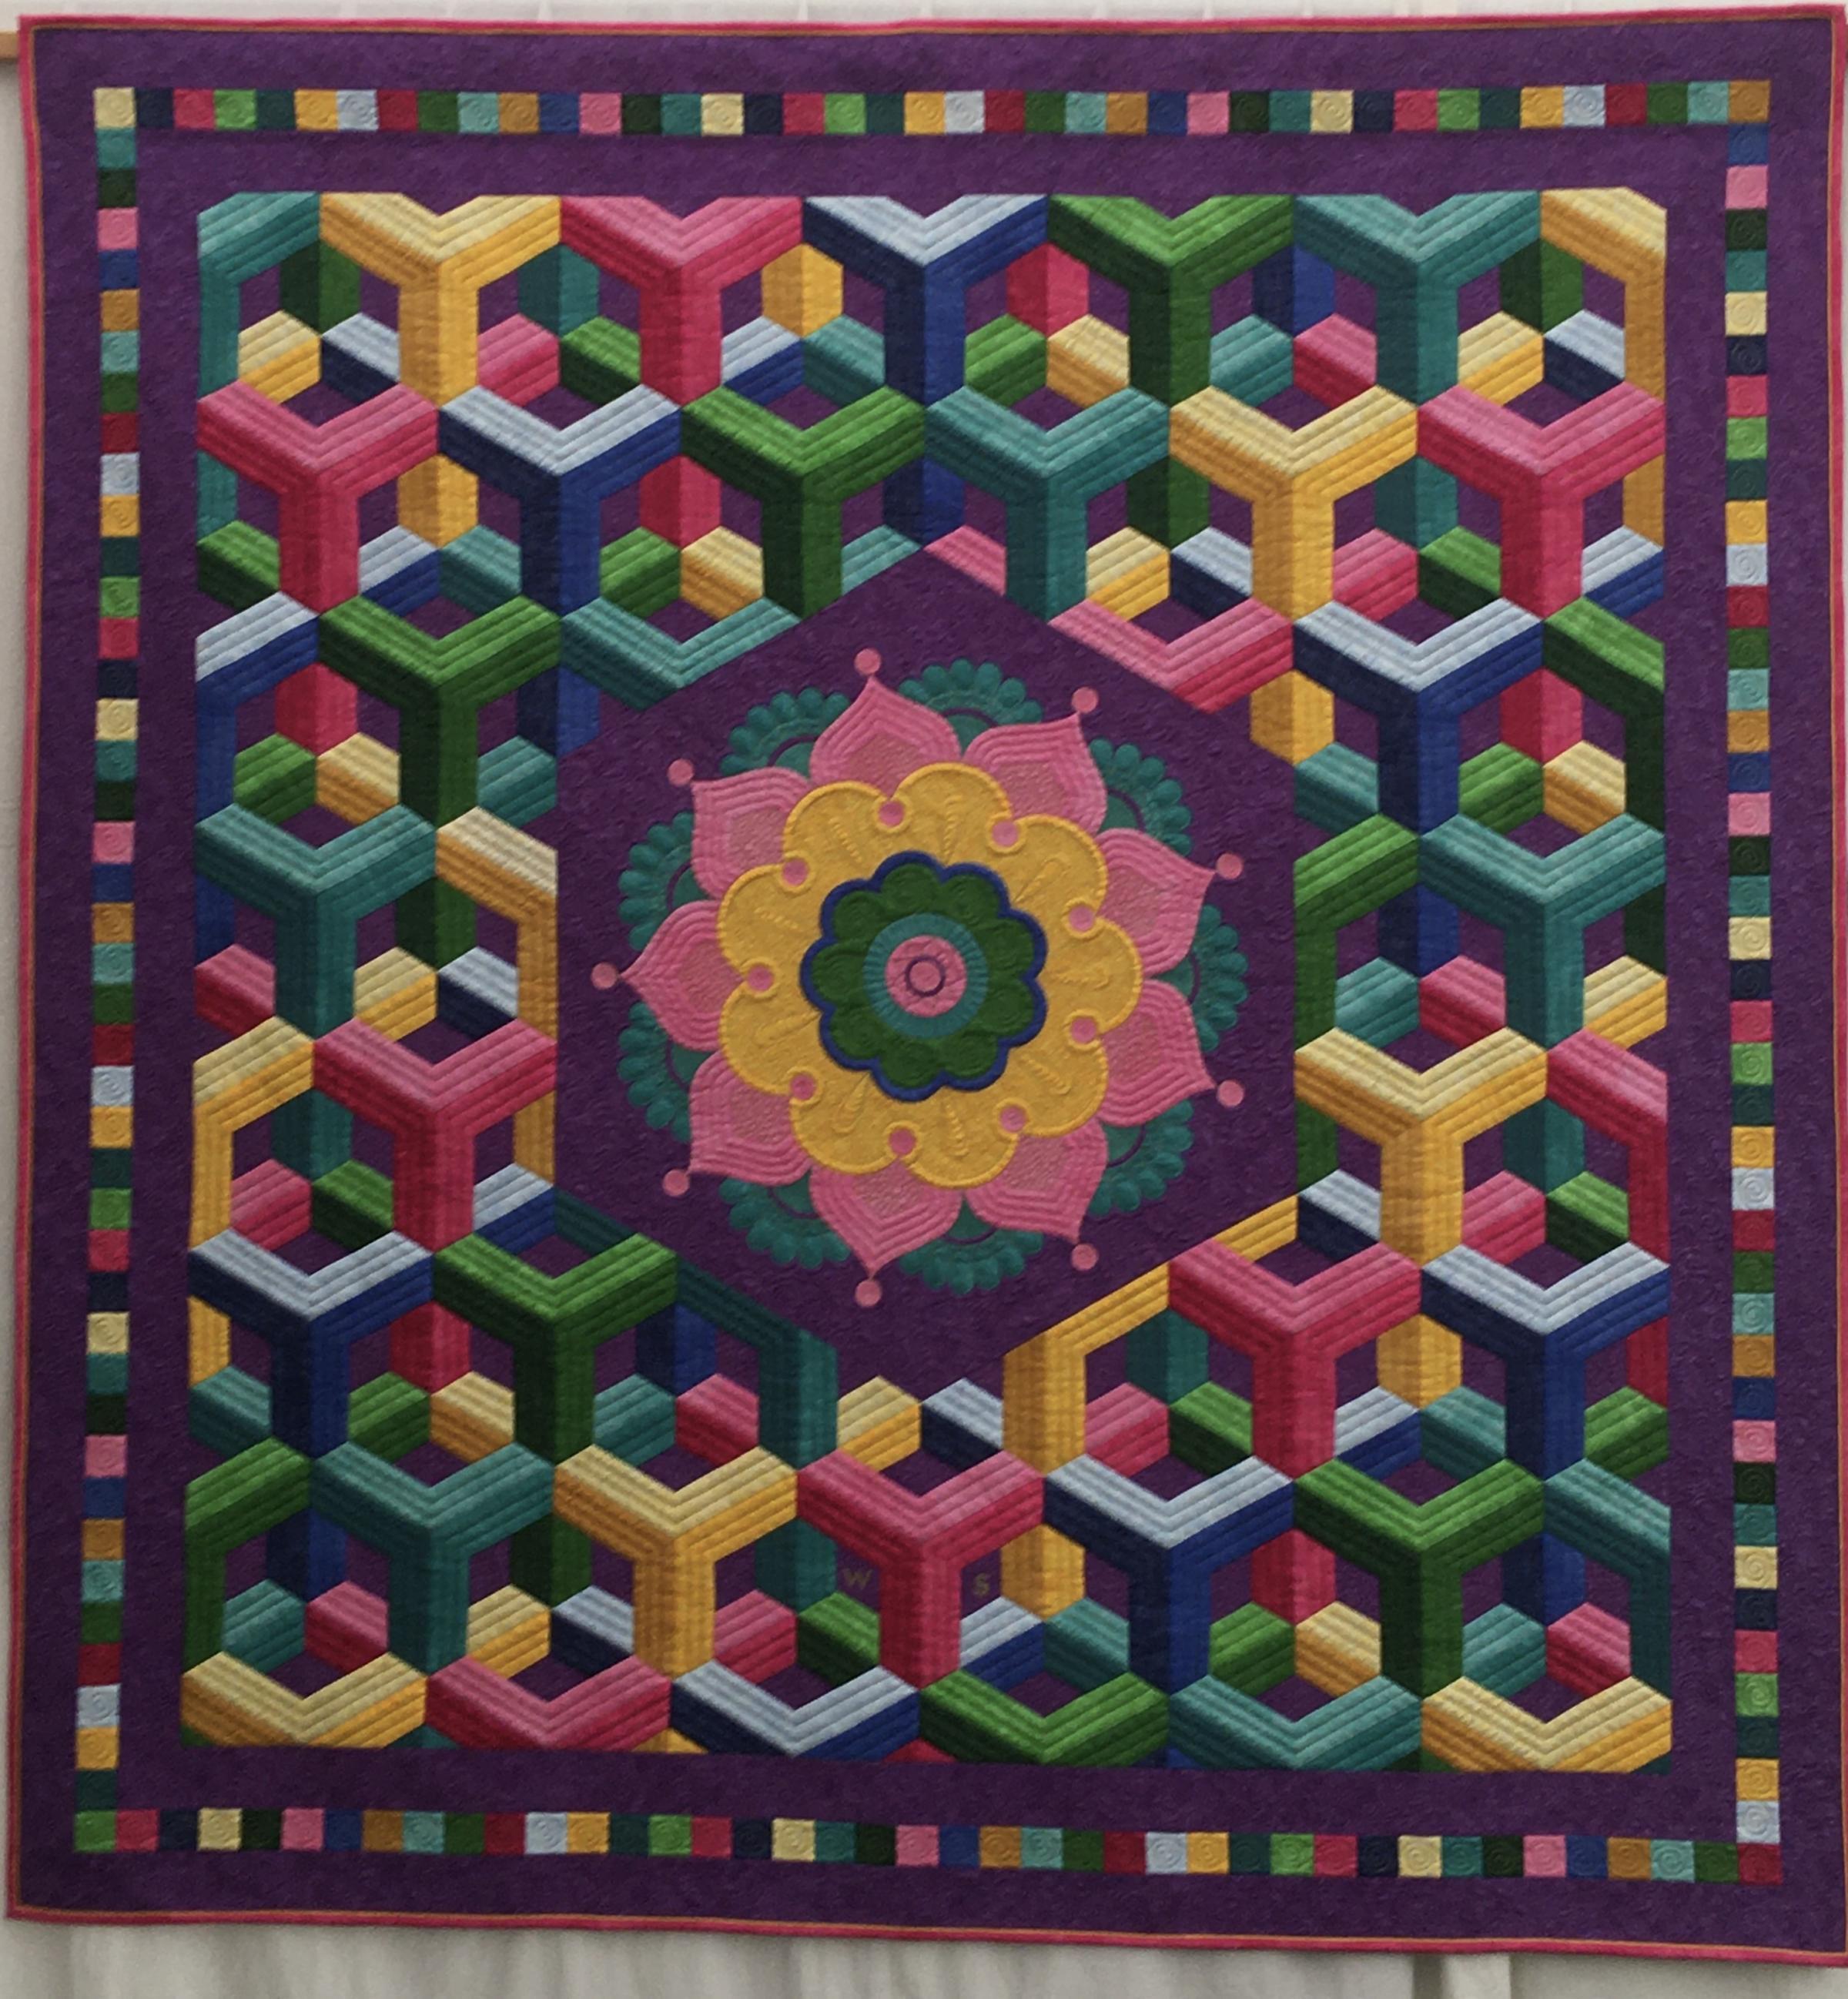 The Quilt Room Award for Piecing: The Colors of Love, by Helen Burnham